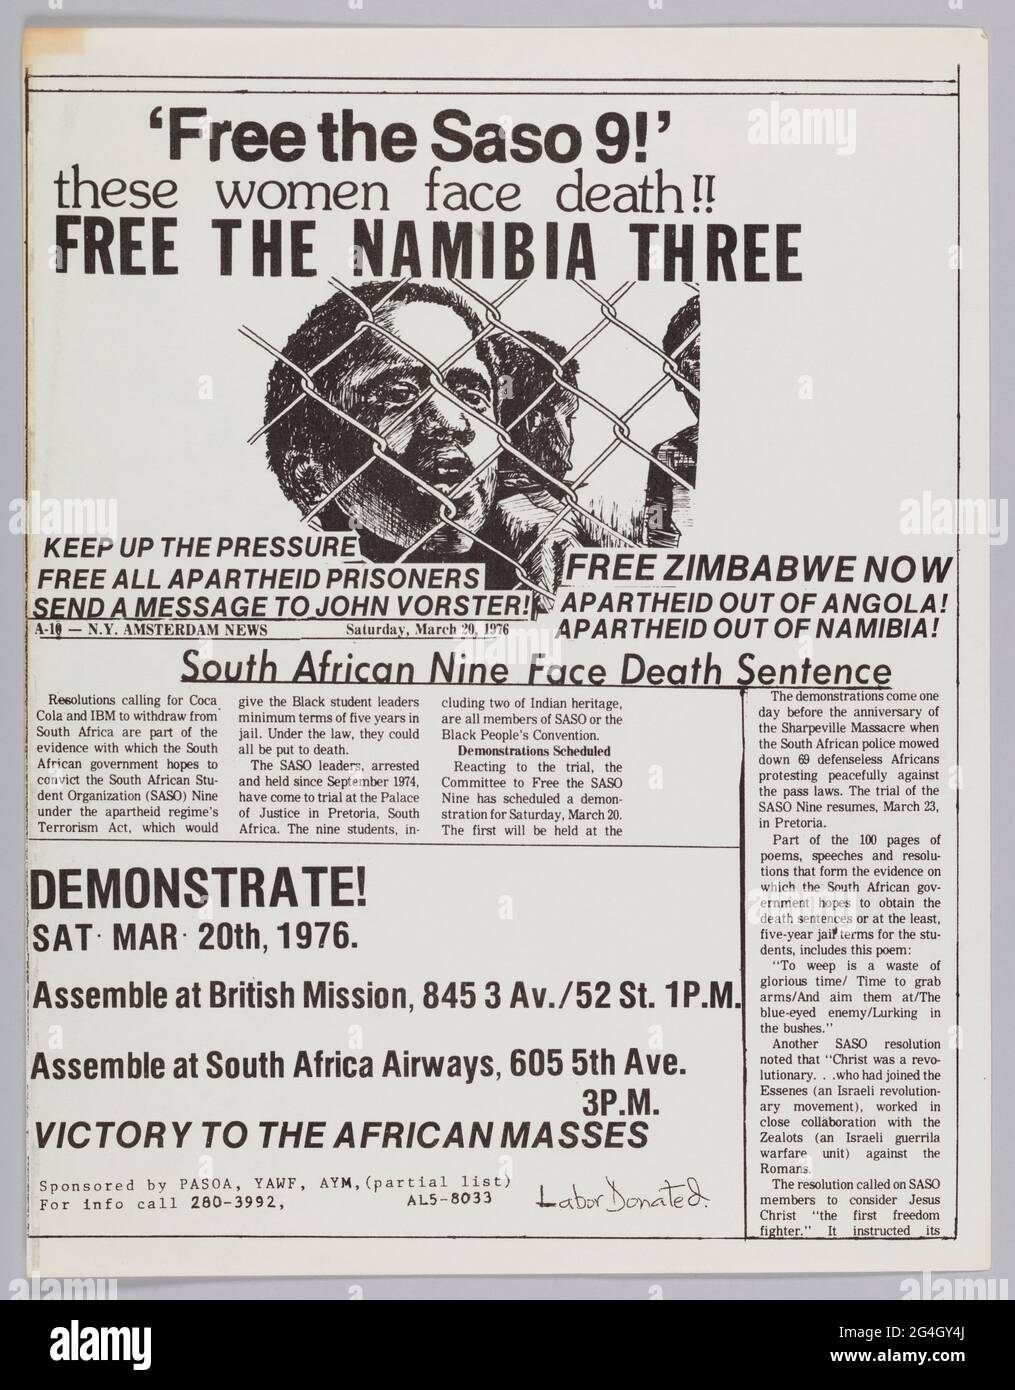 This flyer announces a demonstration in support of freeing the Saso 9 and the Namibia 3. The title reads: ['Free the Saso 9' / these women face death!! / FREE THE NAMIBIA THREE]. Below the title is an illustration of the Namibia Three. Information regarding the protest is at the bottom left corner of the flyer and reads: [DEMONSTRATE! / SAT MAR 20th, 1976. / Assemble at British Mission, 845 3 Av./ 52 St. 1P.M. / Assemble at South Africa Airways, 65 5th Ave. / 3 P.M. / VICTORY TO THE AFRICAN MASSES / Sponsored by PASOA, YAWF, AYM, (partial list)]. The back of the flyer is blank. The South Afric Stock Photo